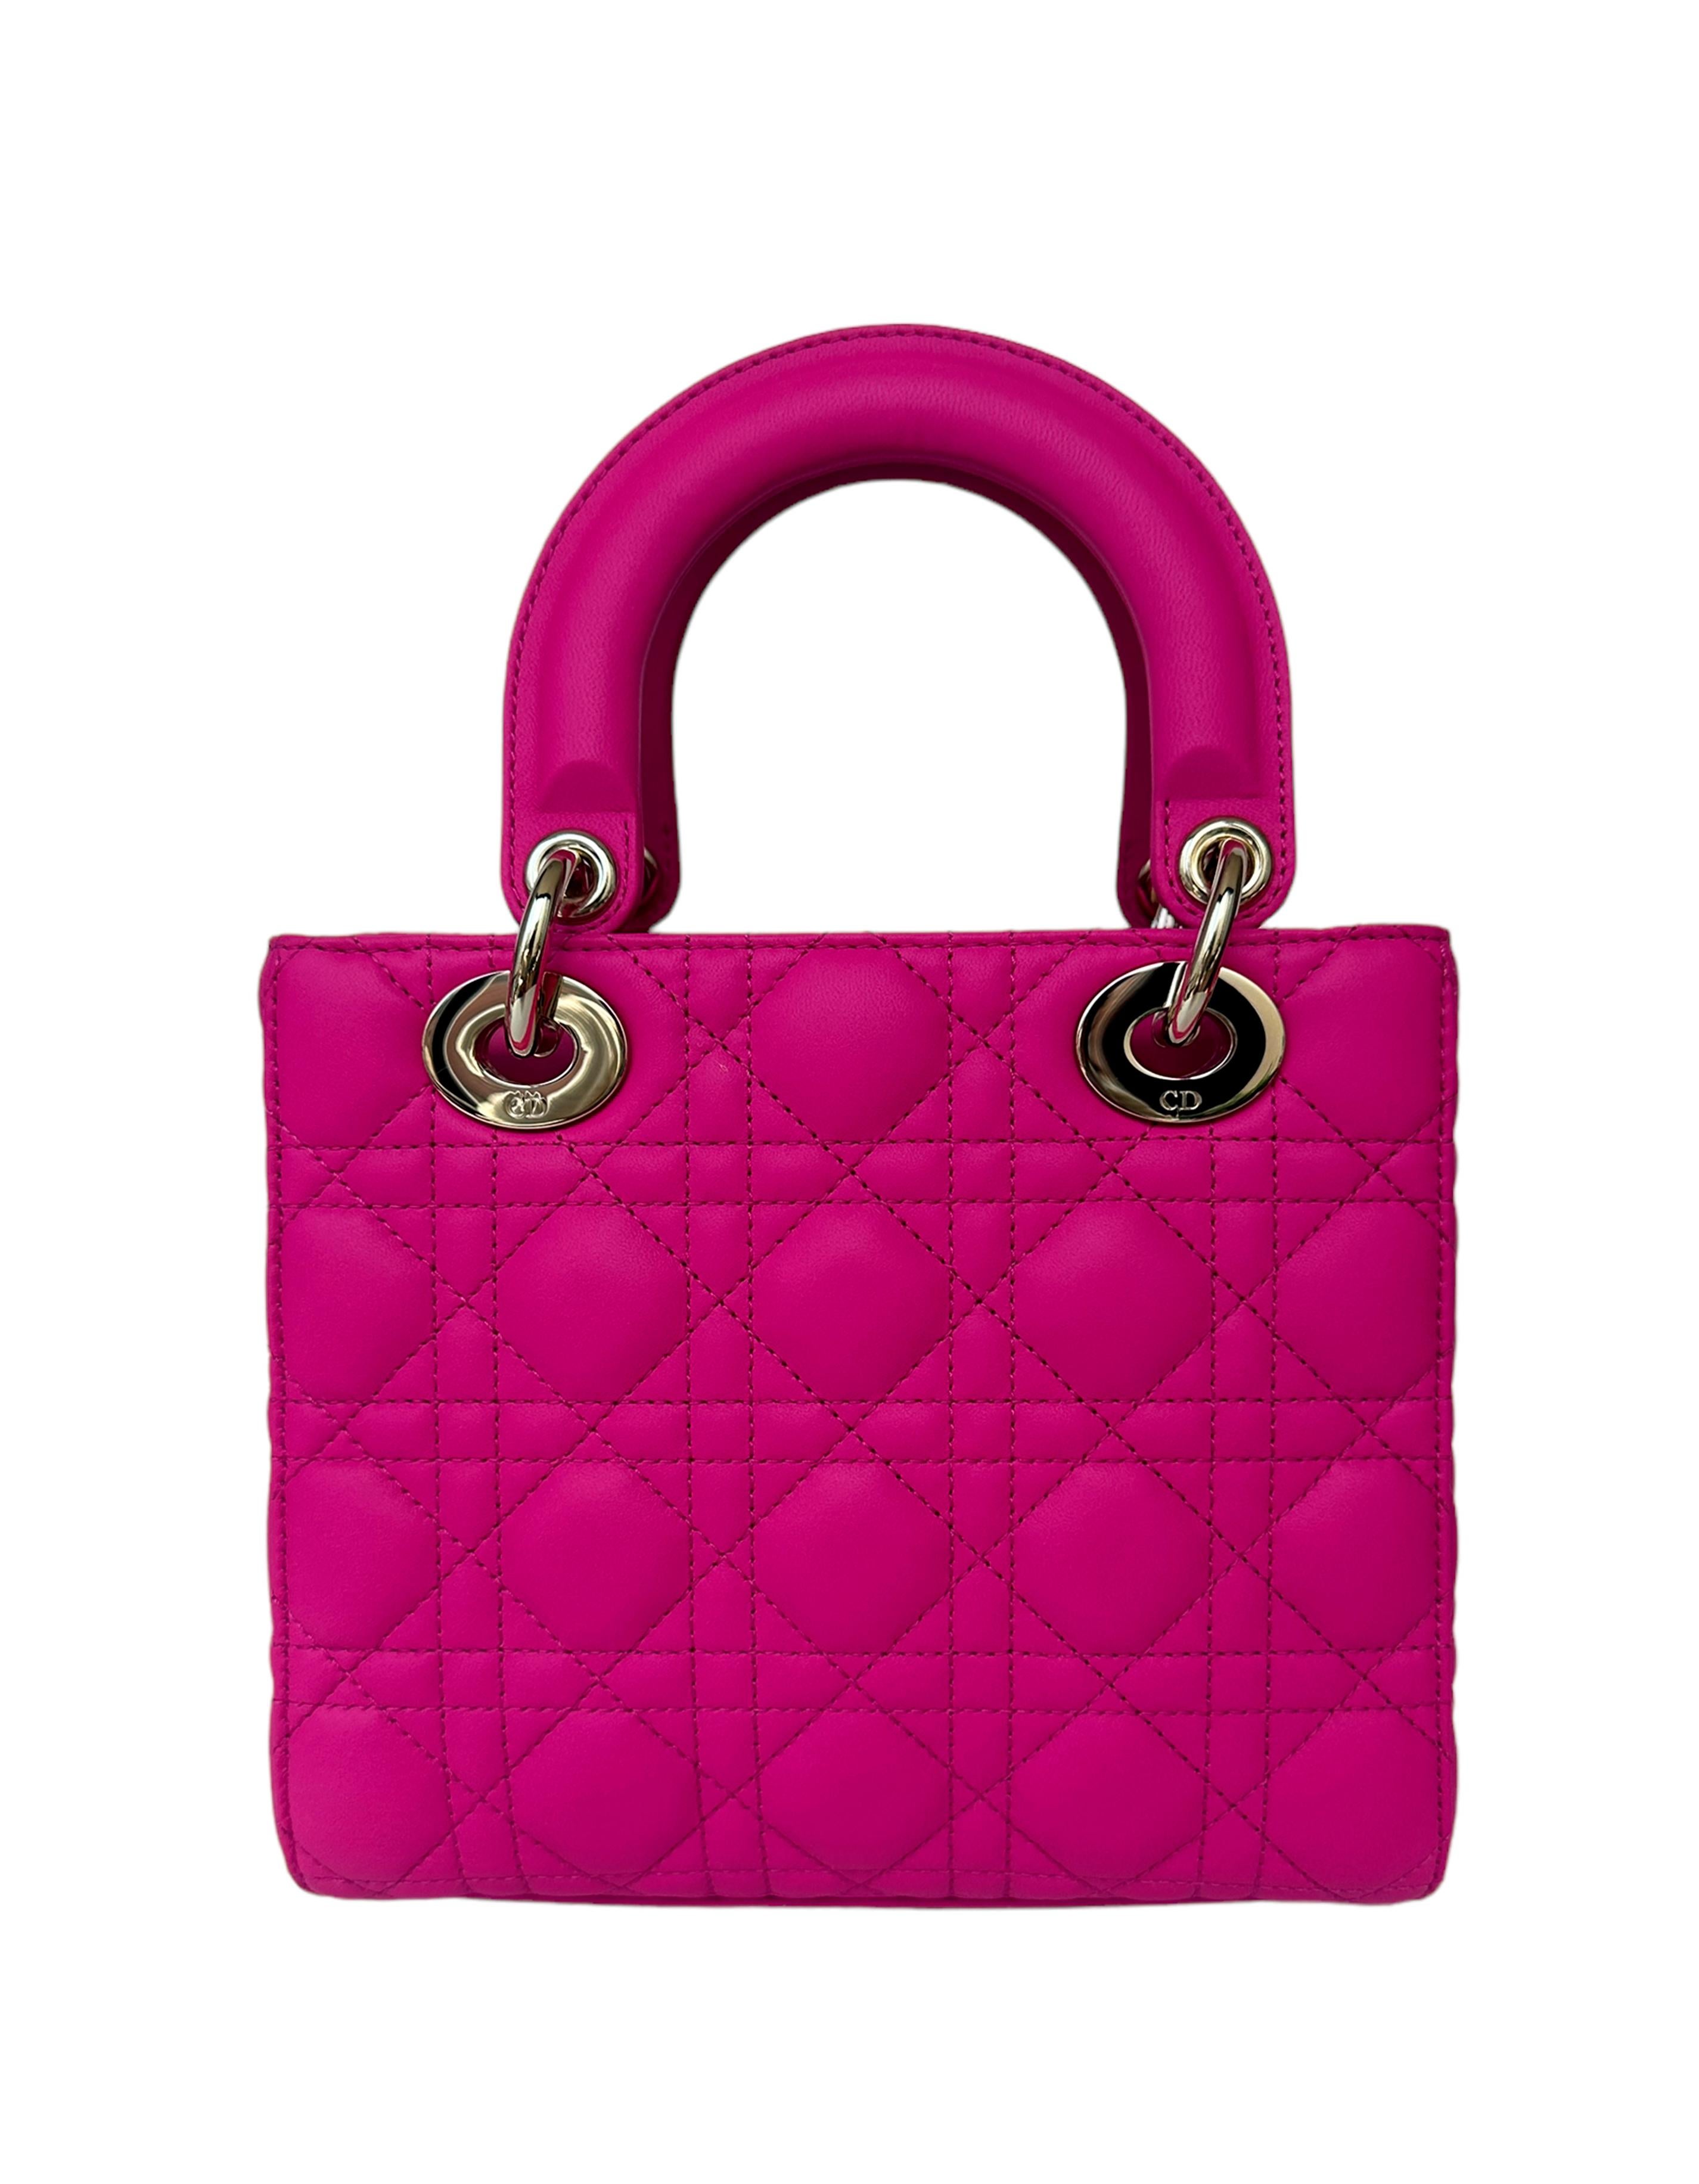 Christian Dior 2023 Rani Pink Leather Cannage Quilted My ABCDior Small Lady Dior Bag.  **Does not include badge charms**

Made In: Italy
Year of Production: 2023
Color: Rani Pink
Hardware: Pale goldtone
Materials: Lambskin Leather
Lining: Suede